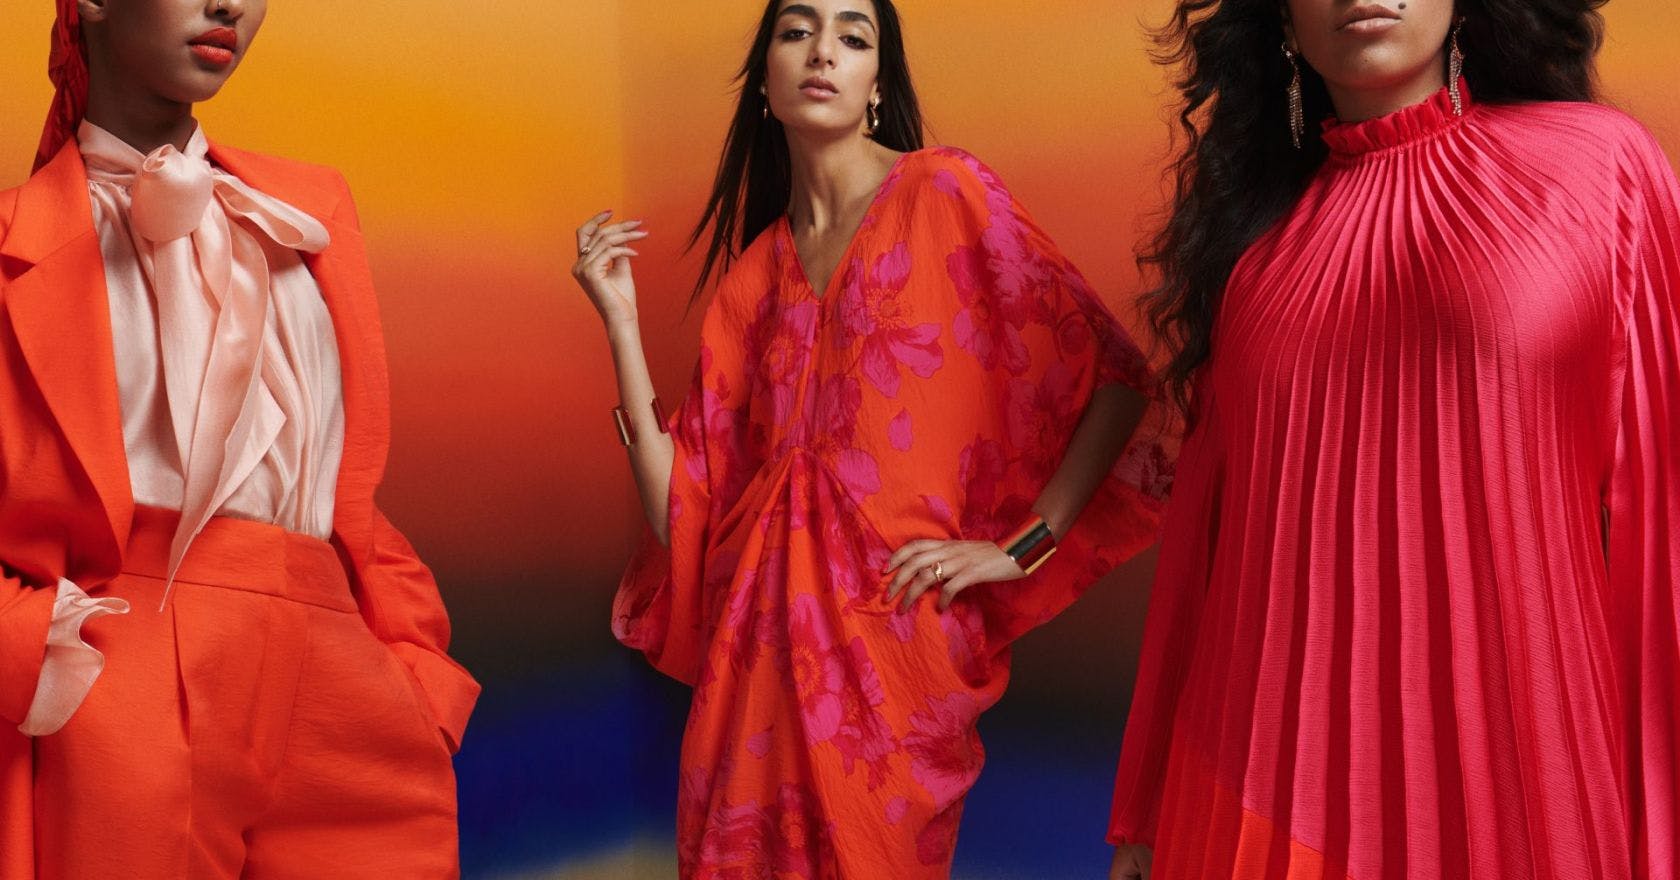 Ramadan fashion: what Muslim women actually want for holy month